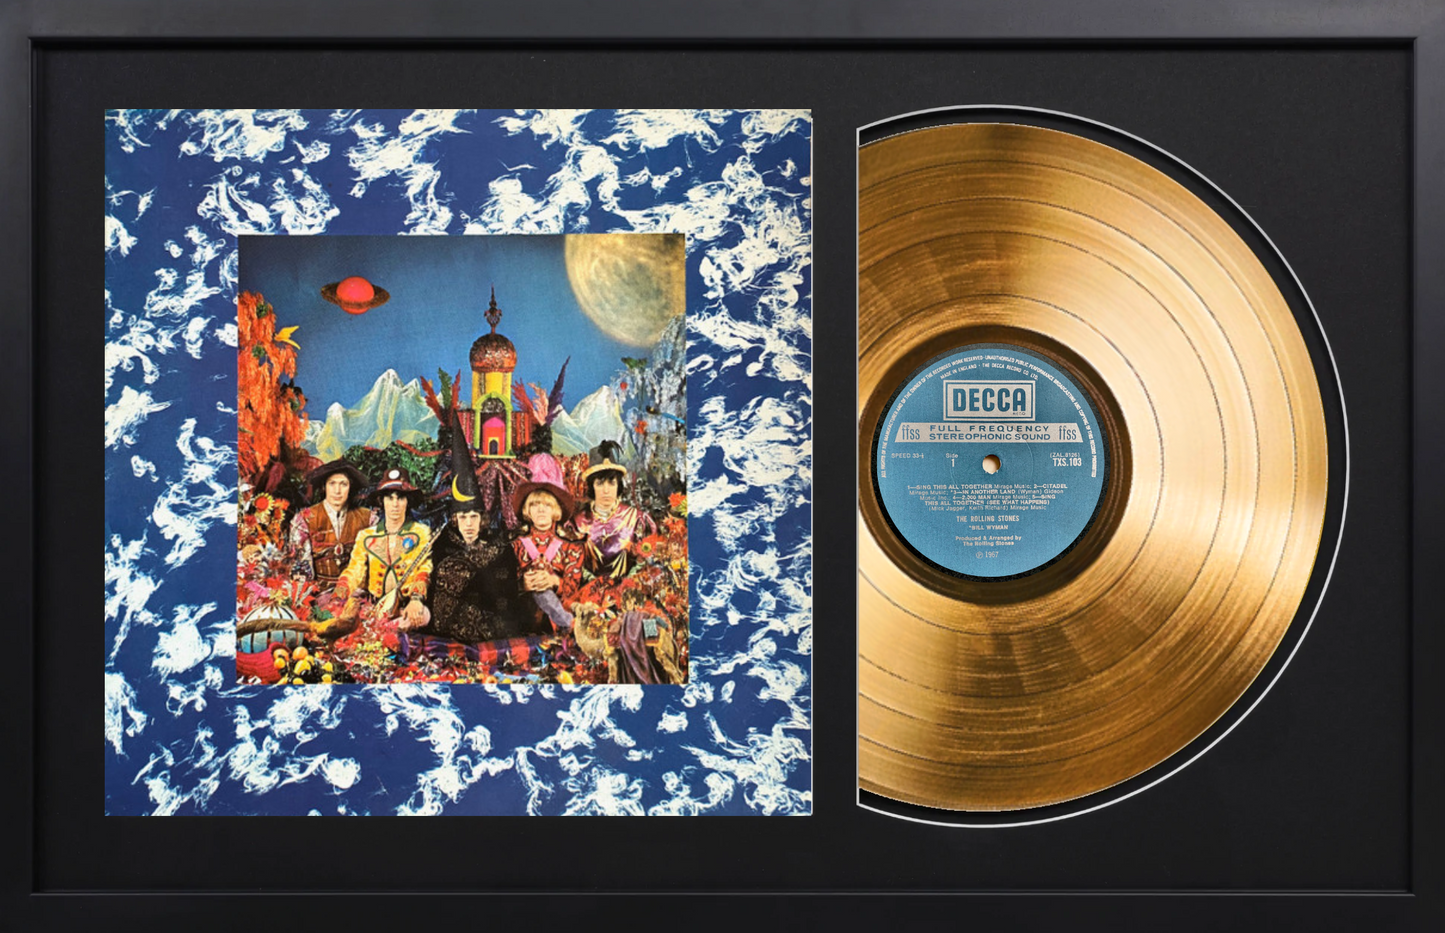 The Rolling Stones - Their Satanic Majesties Request - 14K Gold Framed Album